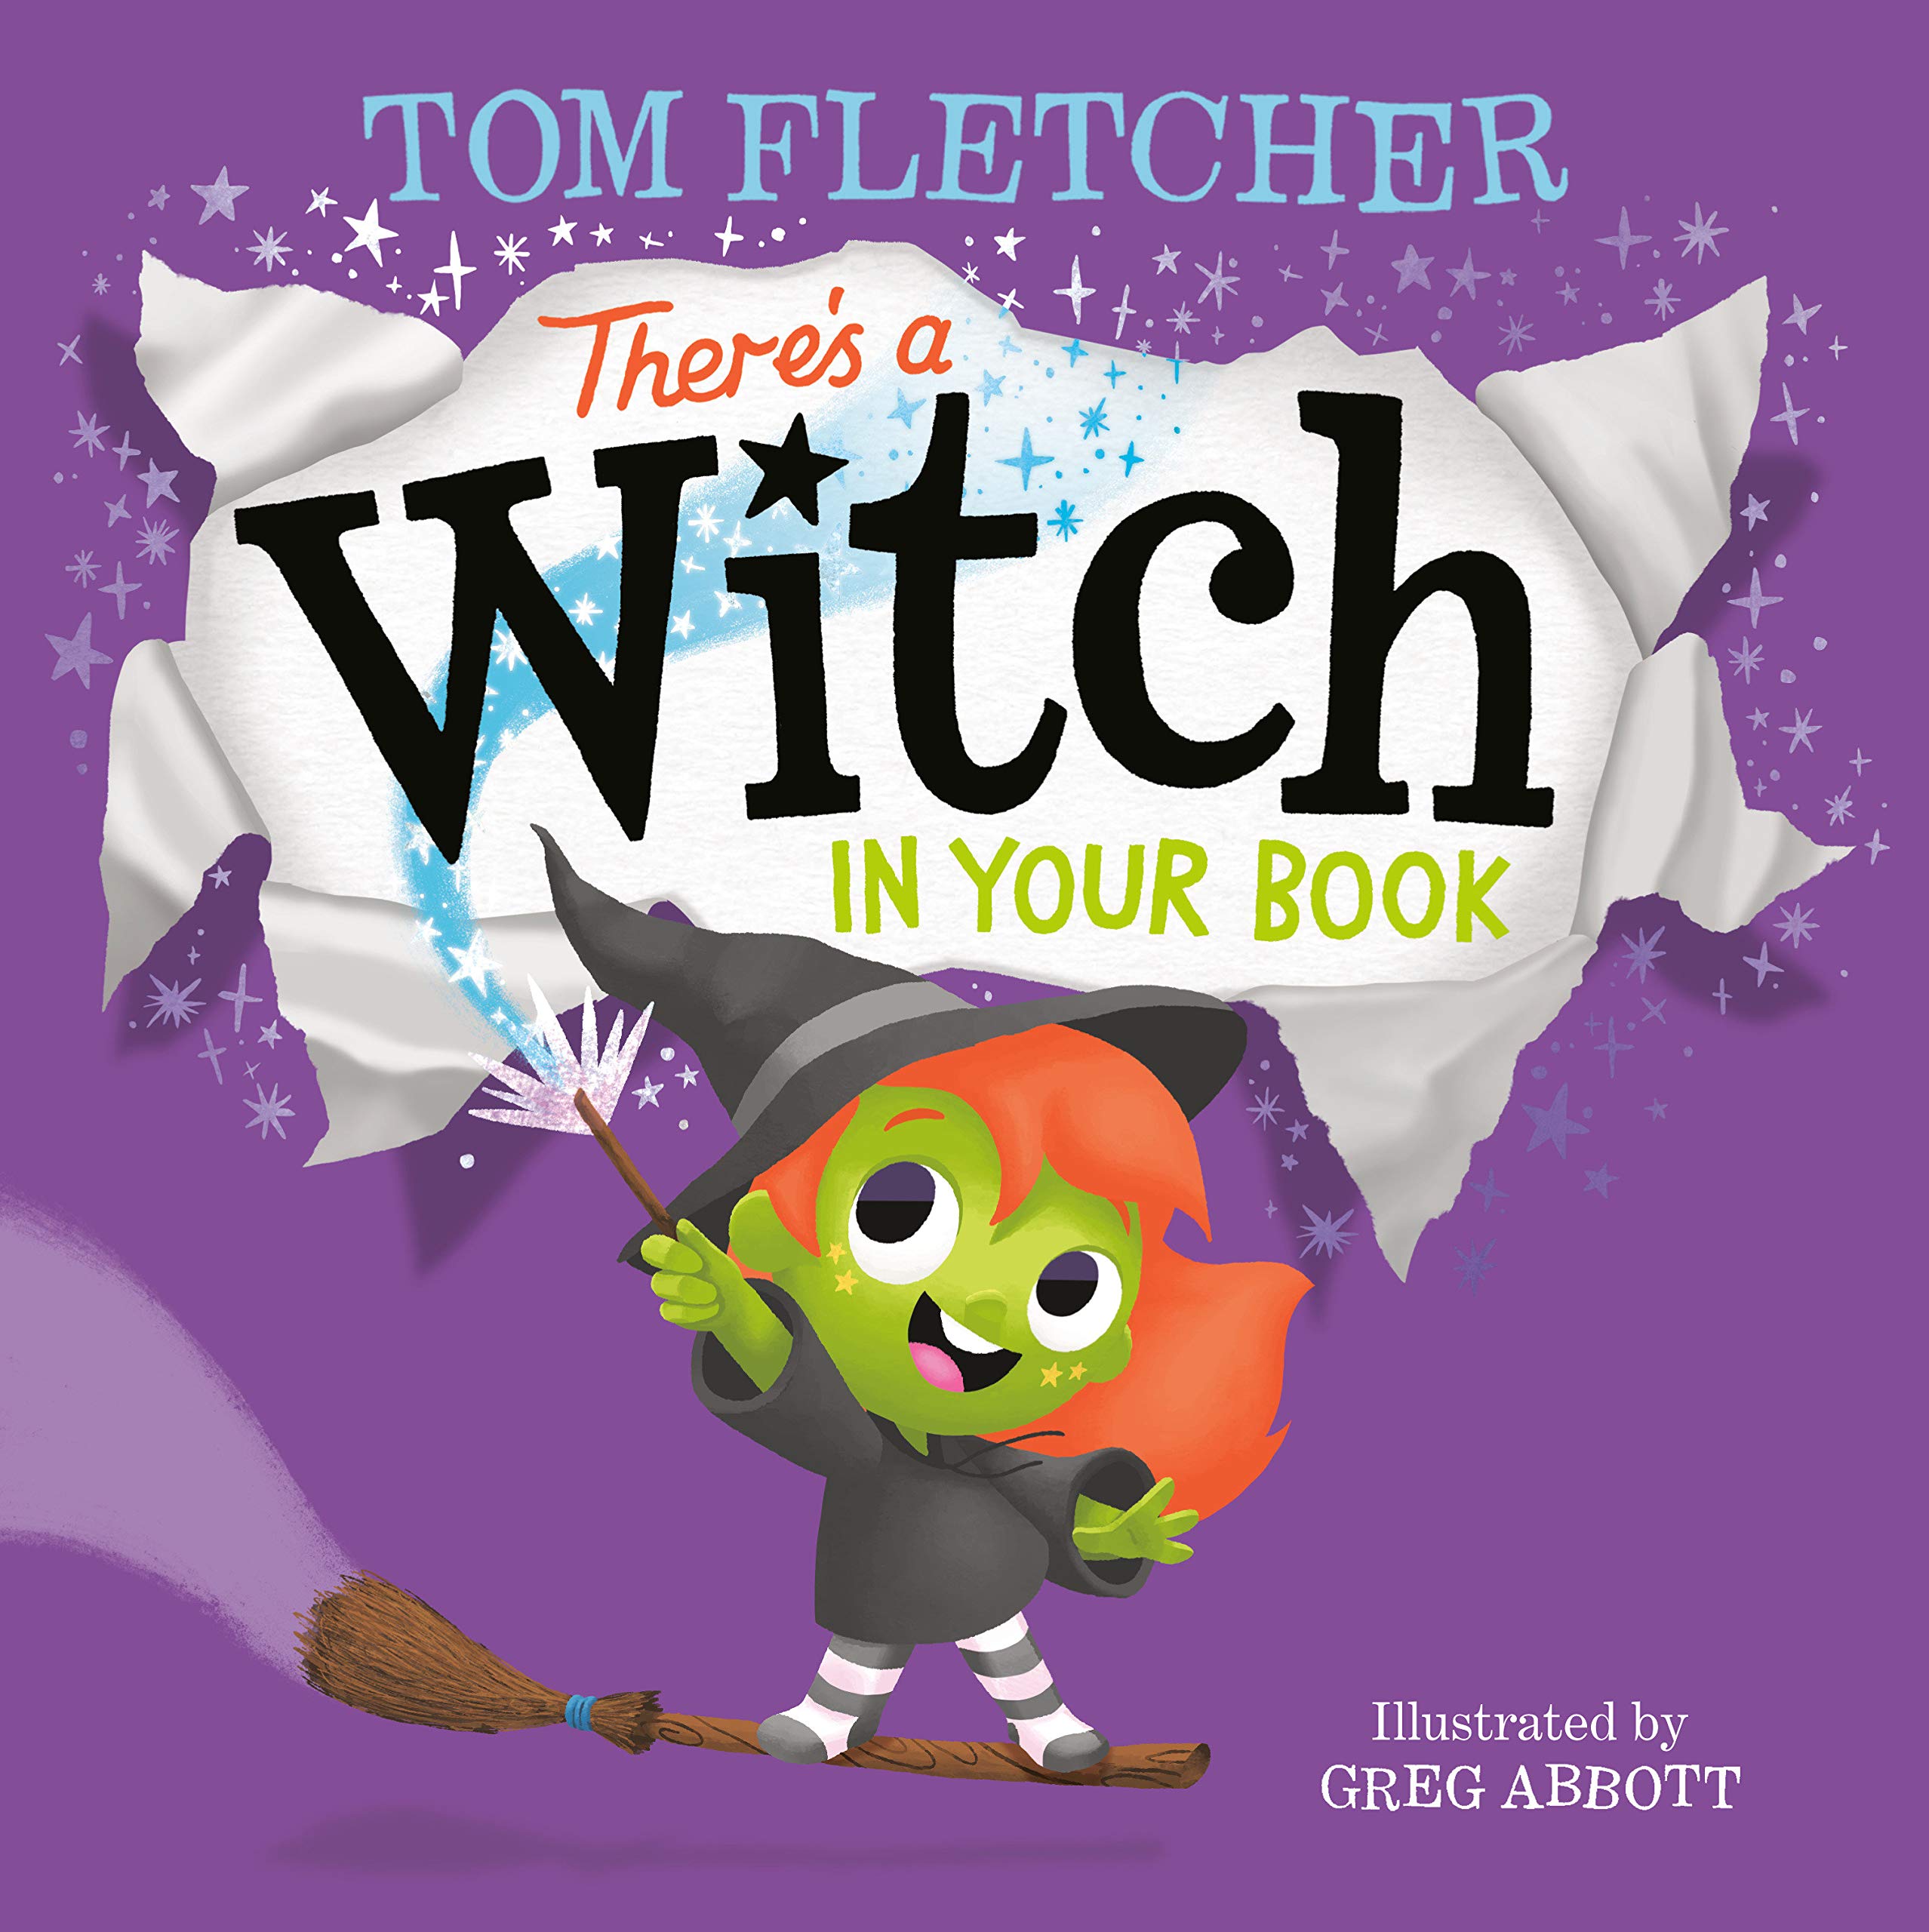 There's a witch in your book by Tom Fletcher